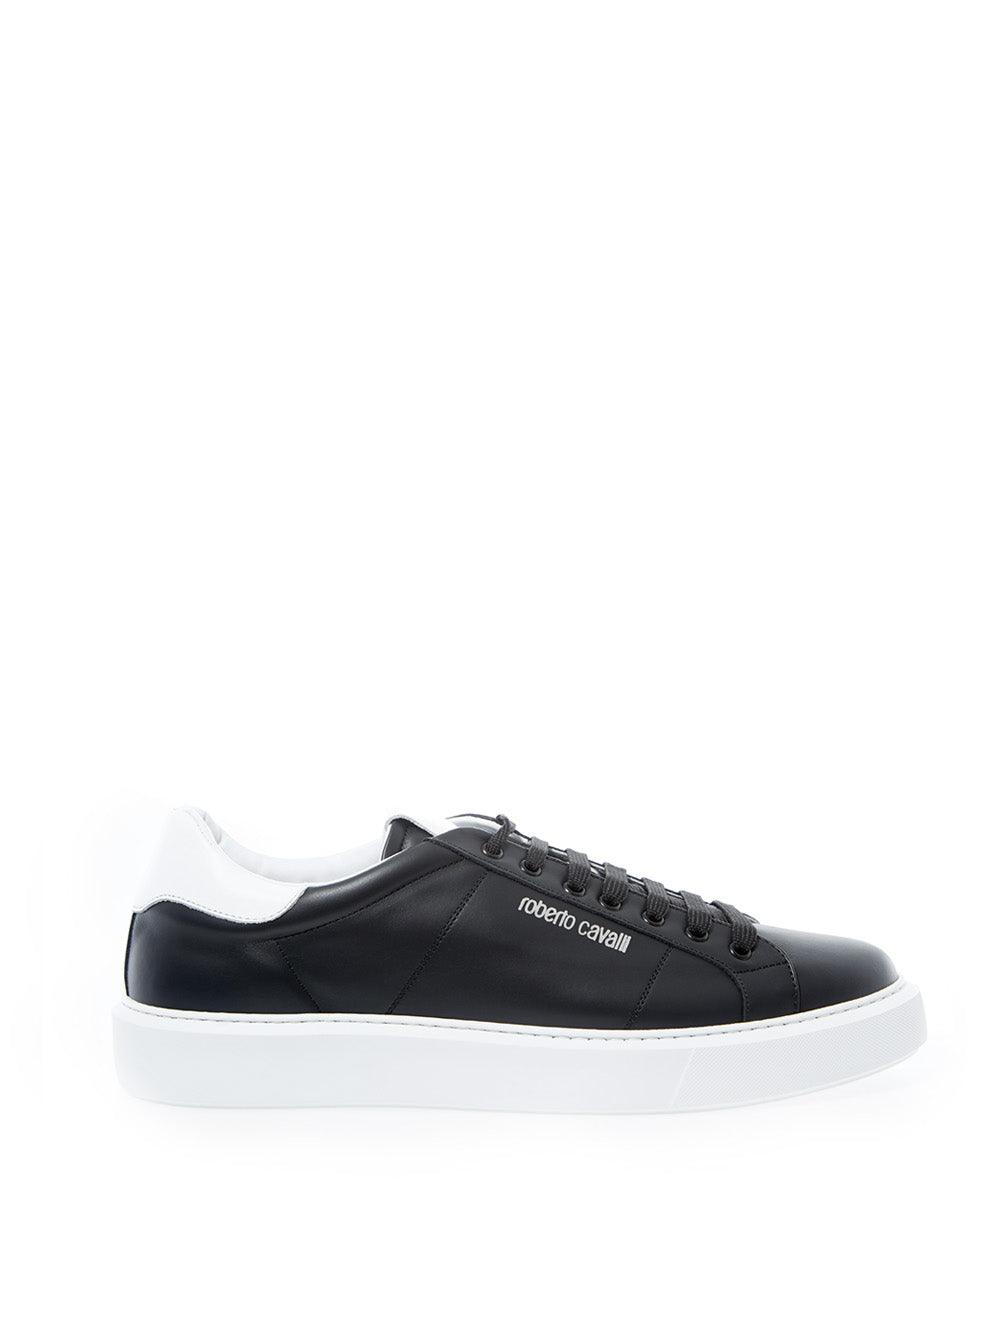 Roberto Cavalli Black Leather Sneakers with Silver Logo - Ellie Belle